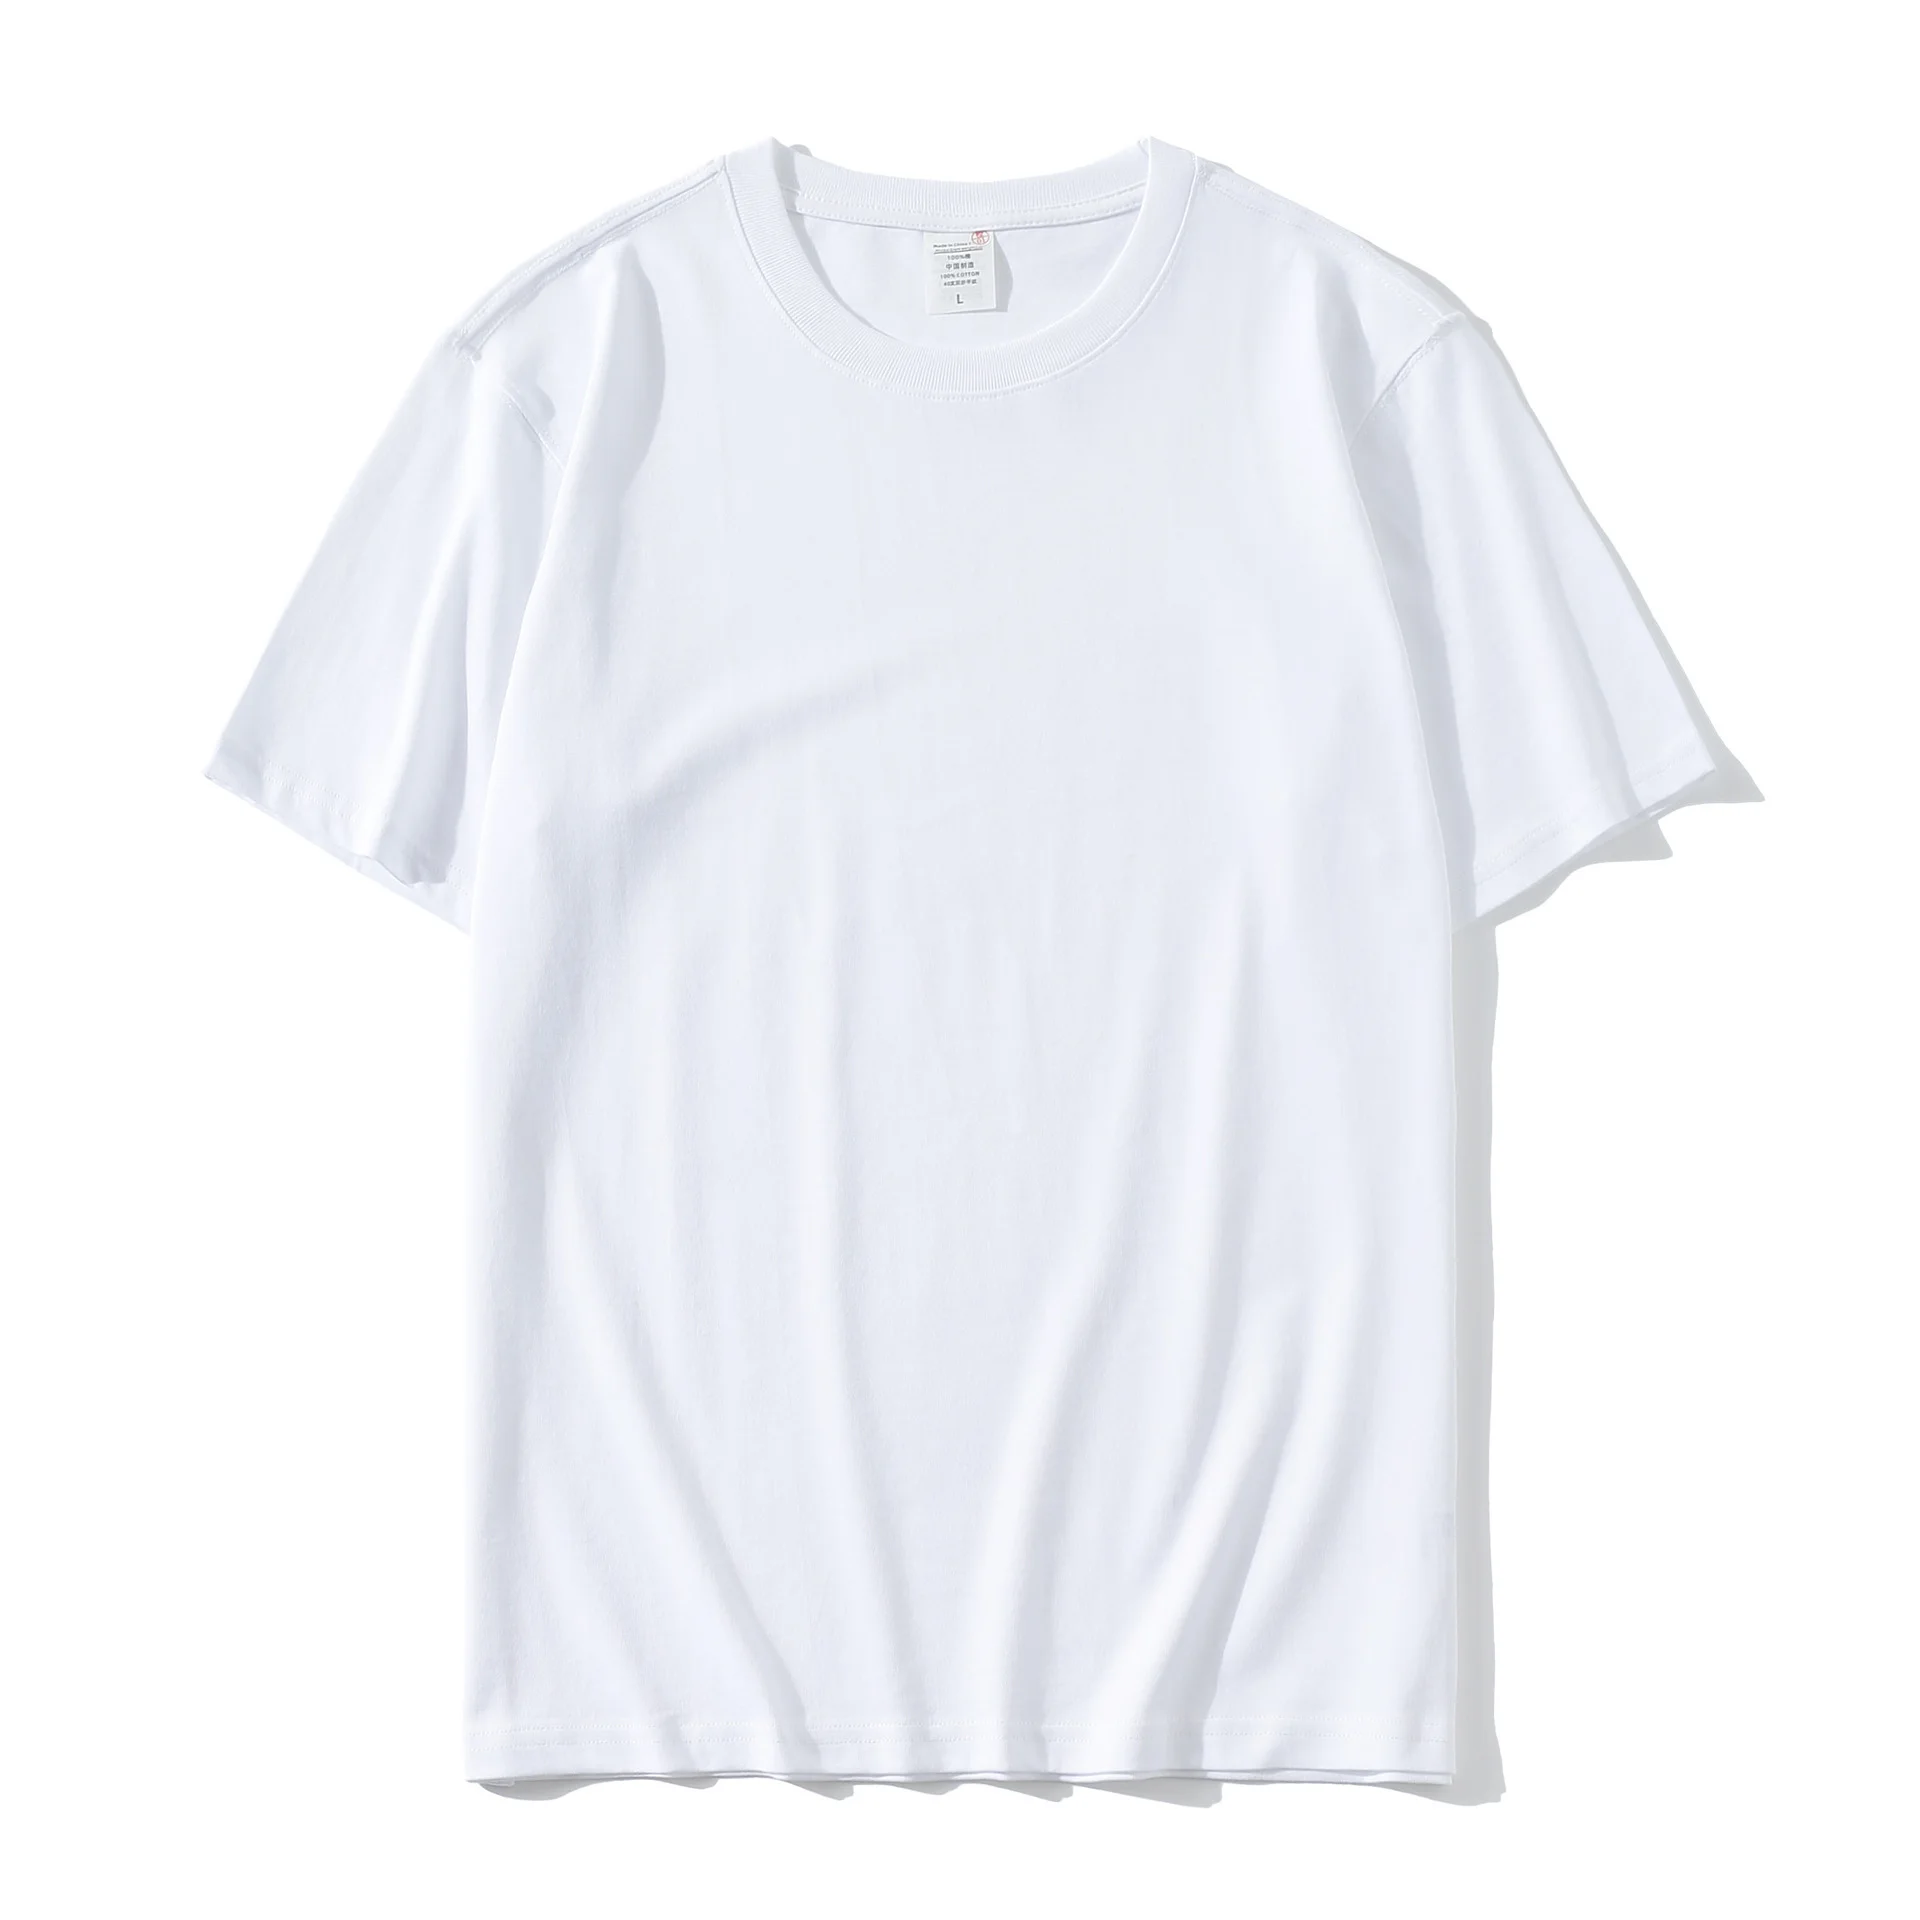 Wholesale Blank T shirts for Printing in Macedonia